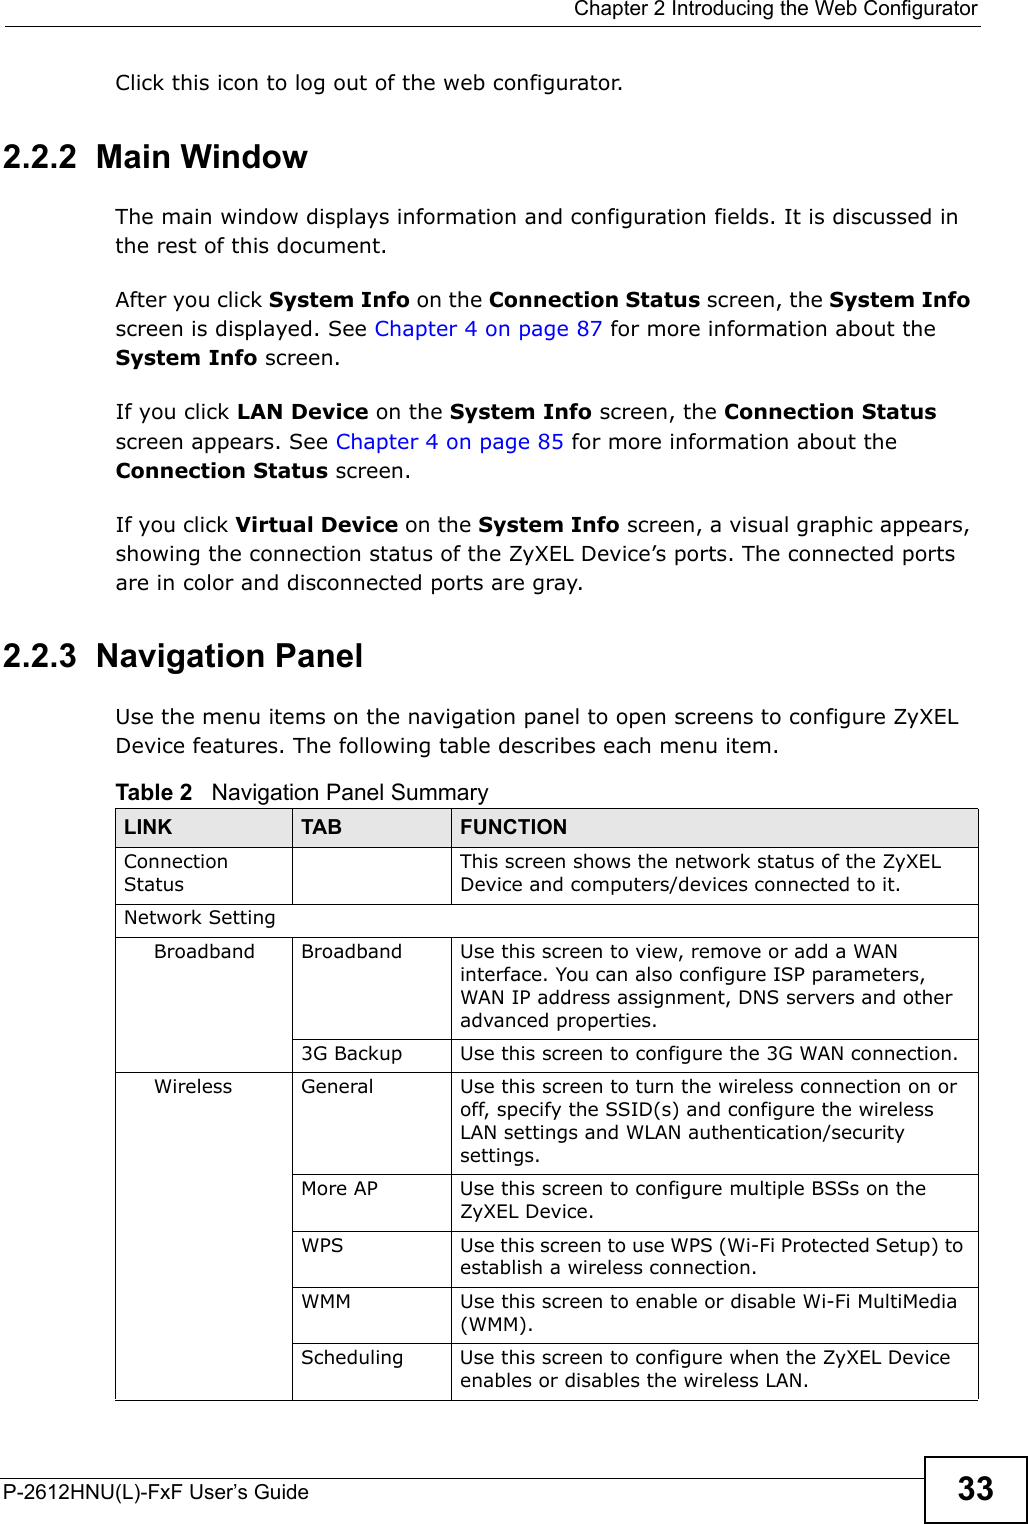  Chapter 2 Introducing the Web ConfiguratorP-2612HNU(L)-FxF User’s Guide 33Click this icon to log out of the web configurator.2.2.2  Main WindowThe main window displays information and configuration fields. It is discussed inthe rest of this document.After you click System Info on the Connection Status screen, the System Infoscreen is displayed. See Chapter 4 on page 87 for more information about the System Info screen.If you click LAN Device on the System Info screen, the Connection Status screen appears. See Chapter 4 on page 85 for more information about the Connection Status screen.If you click Virtual Device on the System Info screen, a visual graphic appears, showing the connection status of the ZyXEL Device’s ports. The connected ports are in color and disconnected ports are gray.2.2.3  Navigation PanelUse the menu items on the navigation panel to open screens to configure ZyXEL Device features. The following table describes each menu item.Table 2   Navigation Panel SummaryLINK TAB FUNCTIONConnection StatusThis screen shows the network status of the ZyXEL Device and computers/devices connected to it.Network SettingBroadband Broadband Use this screen to view, remove or add a WAN interface. You can also configure ISP parameters, WAN IP address assignment, DNS servers and other advanced properties.3G Backup Use this screen to configure the 3G WAN connection.Wireless General Use this screen to turn the wireless connection on or off, specify the SSID(s) and configure the wireless LAN settings and WLAN authentication/security settings.More AP Use this screen to configure multiple BSSs on theZyXEL Device.WPS Use this screen to use WPS (Wi-Fi Protected Setup) to establish a wireless connection.WMM Use this screen to enable or disable Wi-Fi MultiMedia (WMM).Scheduling Use this screen to configure when the ZyXEL Device enables or disables the wireless LAN.